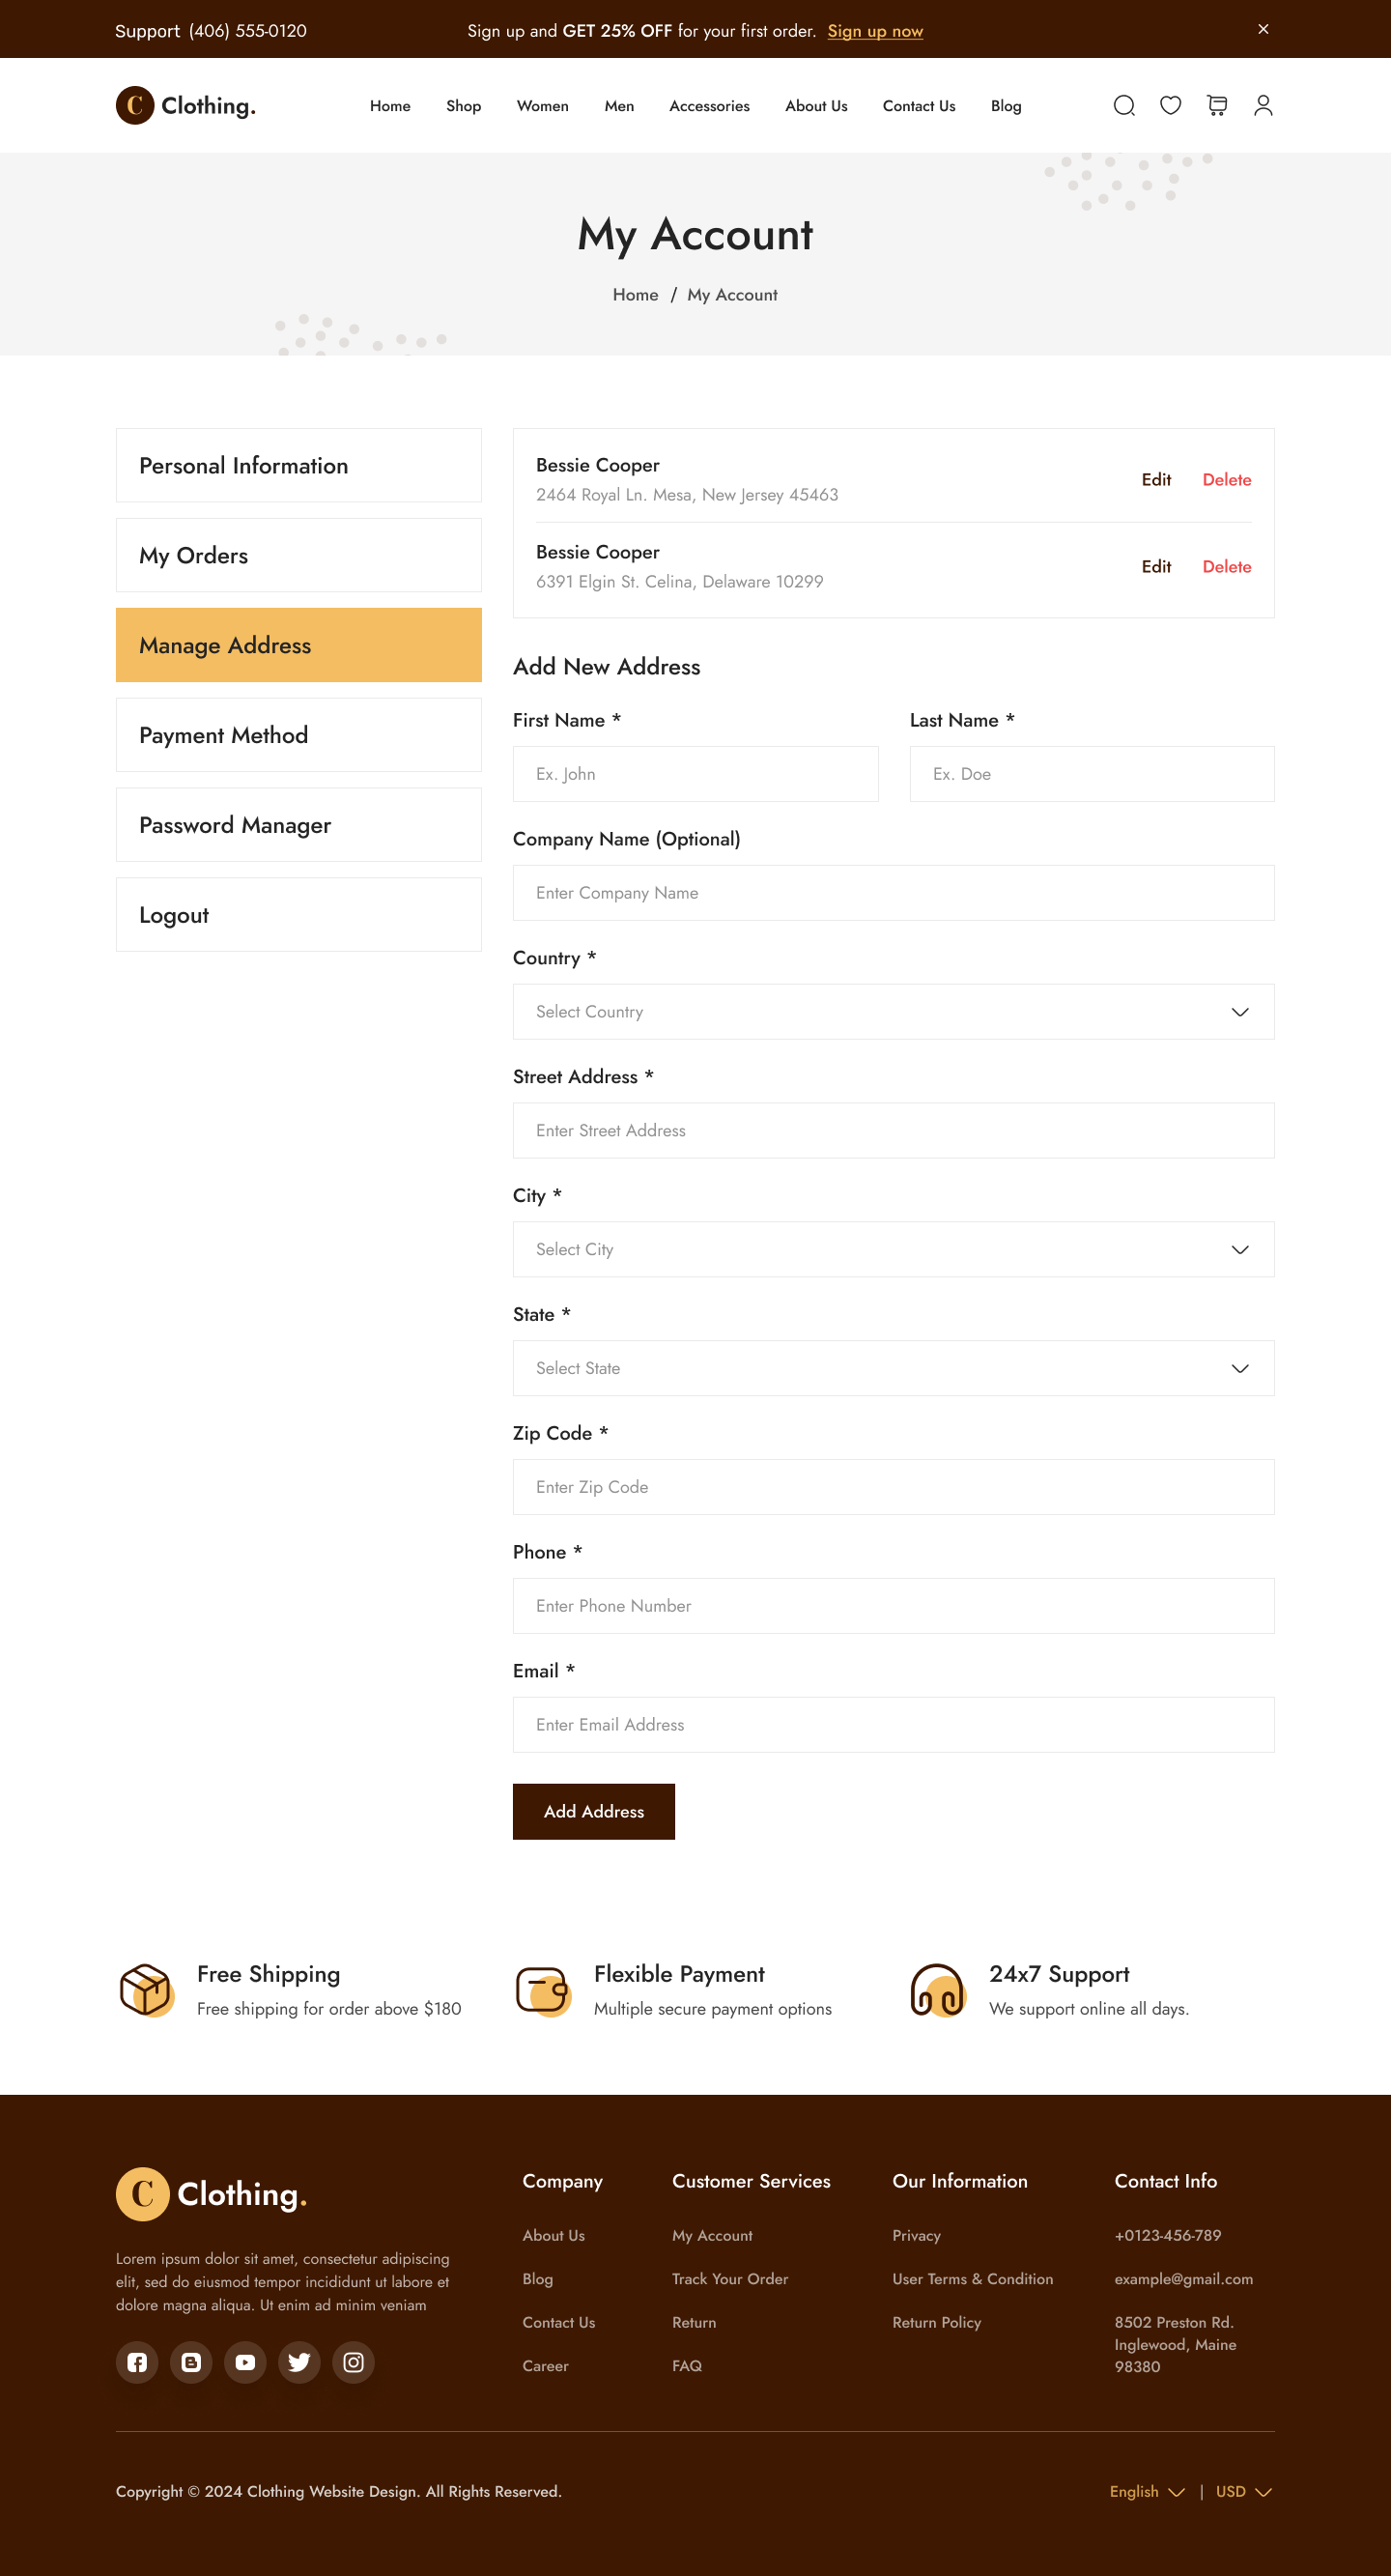 Clothing Store Website UI UX My Account-Manage Address Page Design